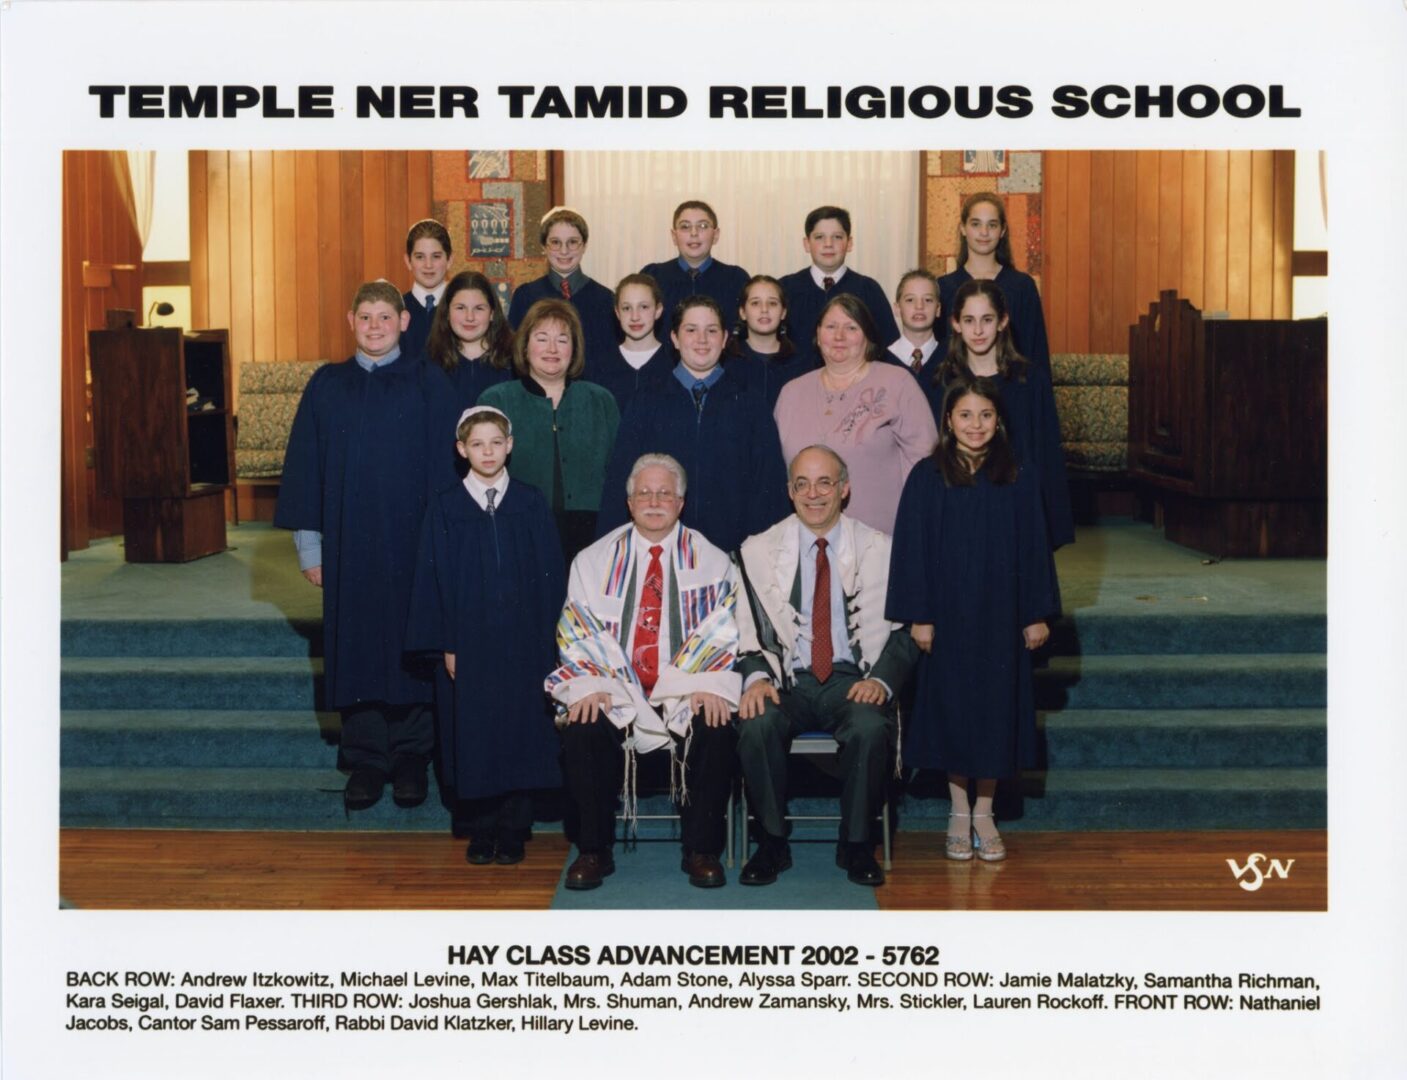 Temple Ner Tamid of the North Shore